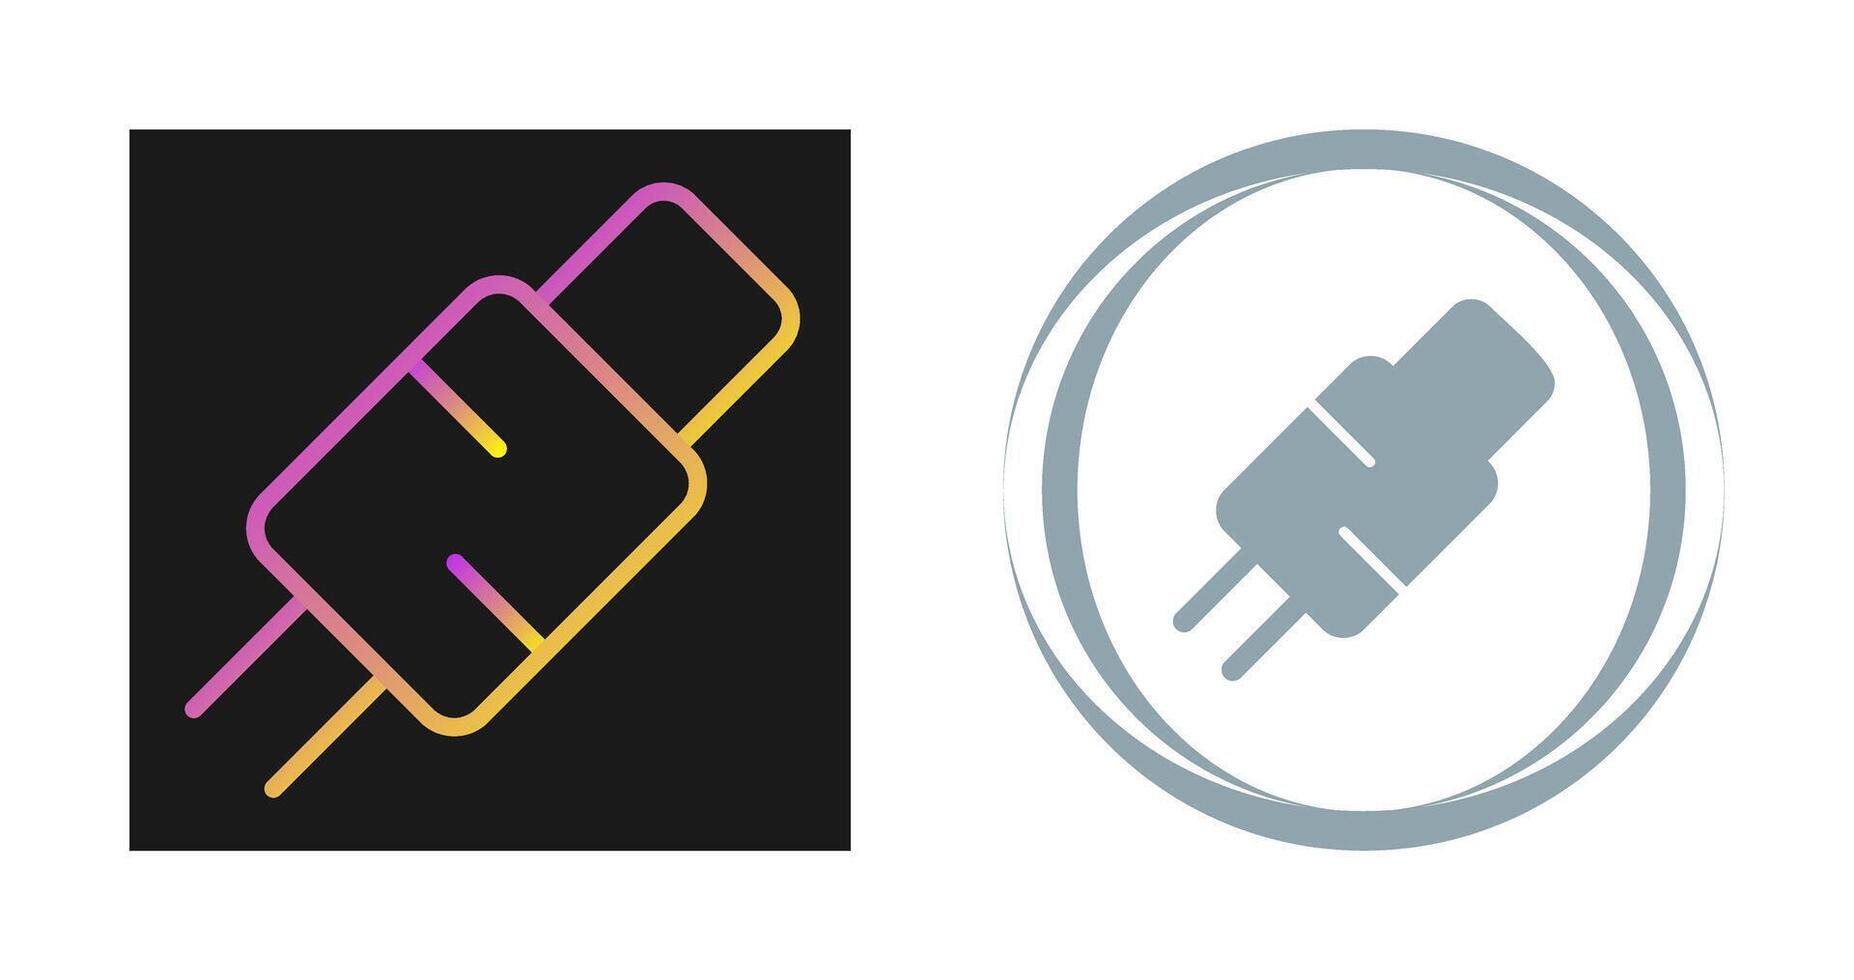 Cable Vector Icon